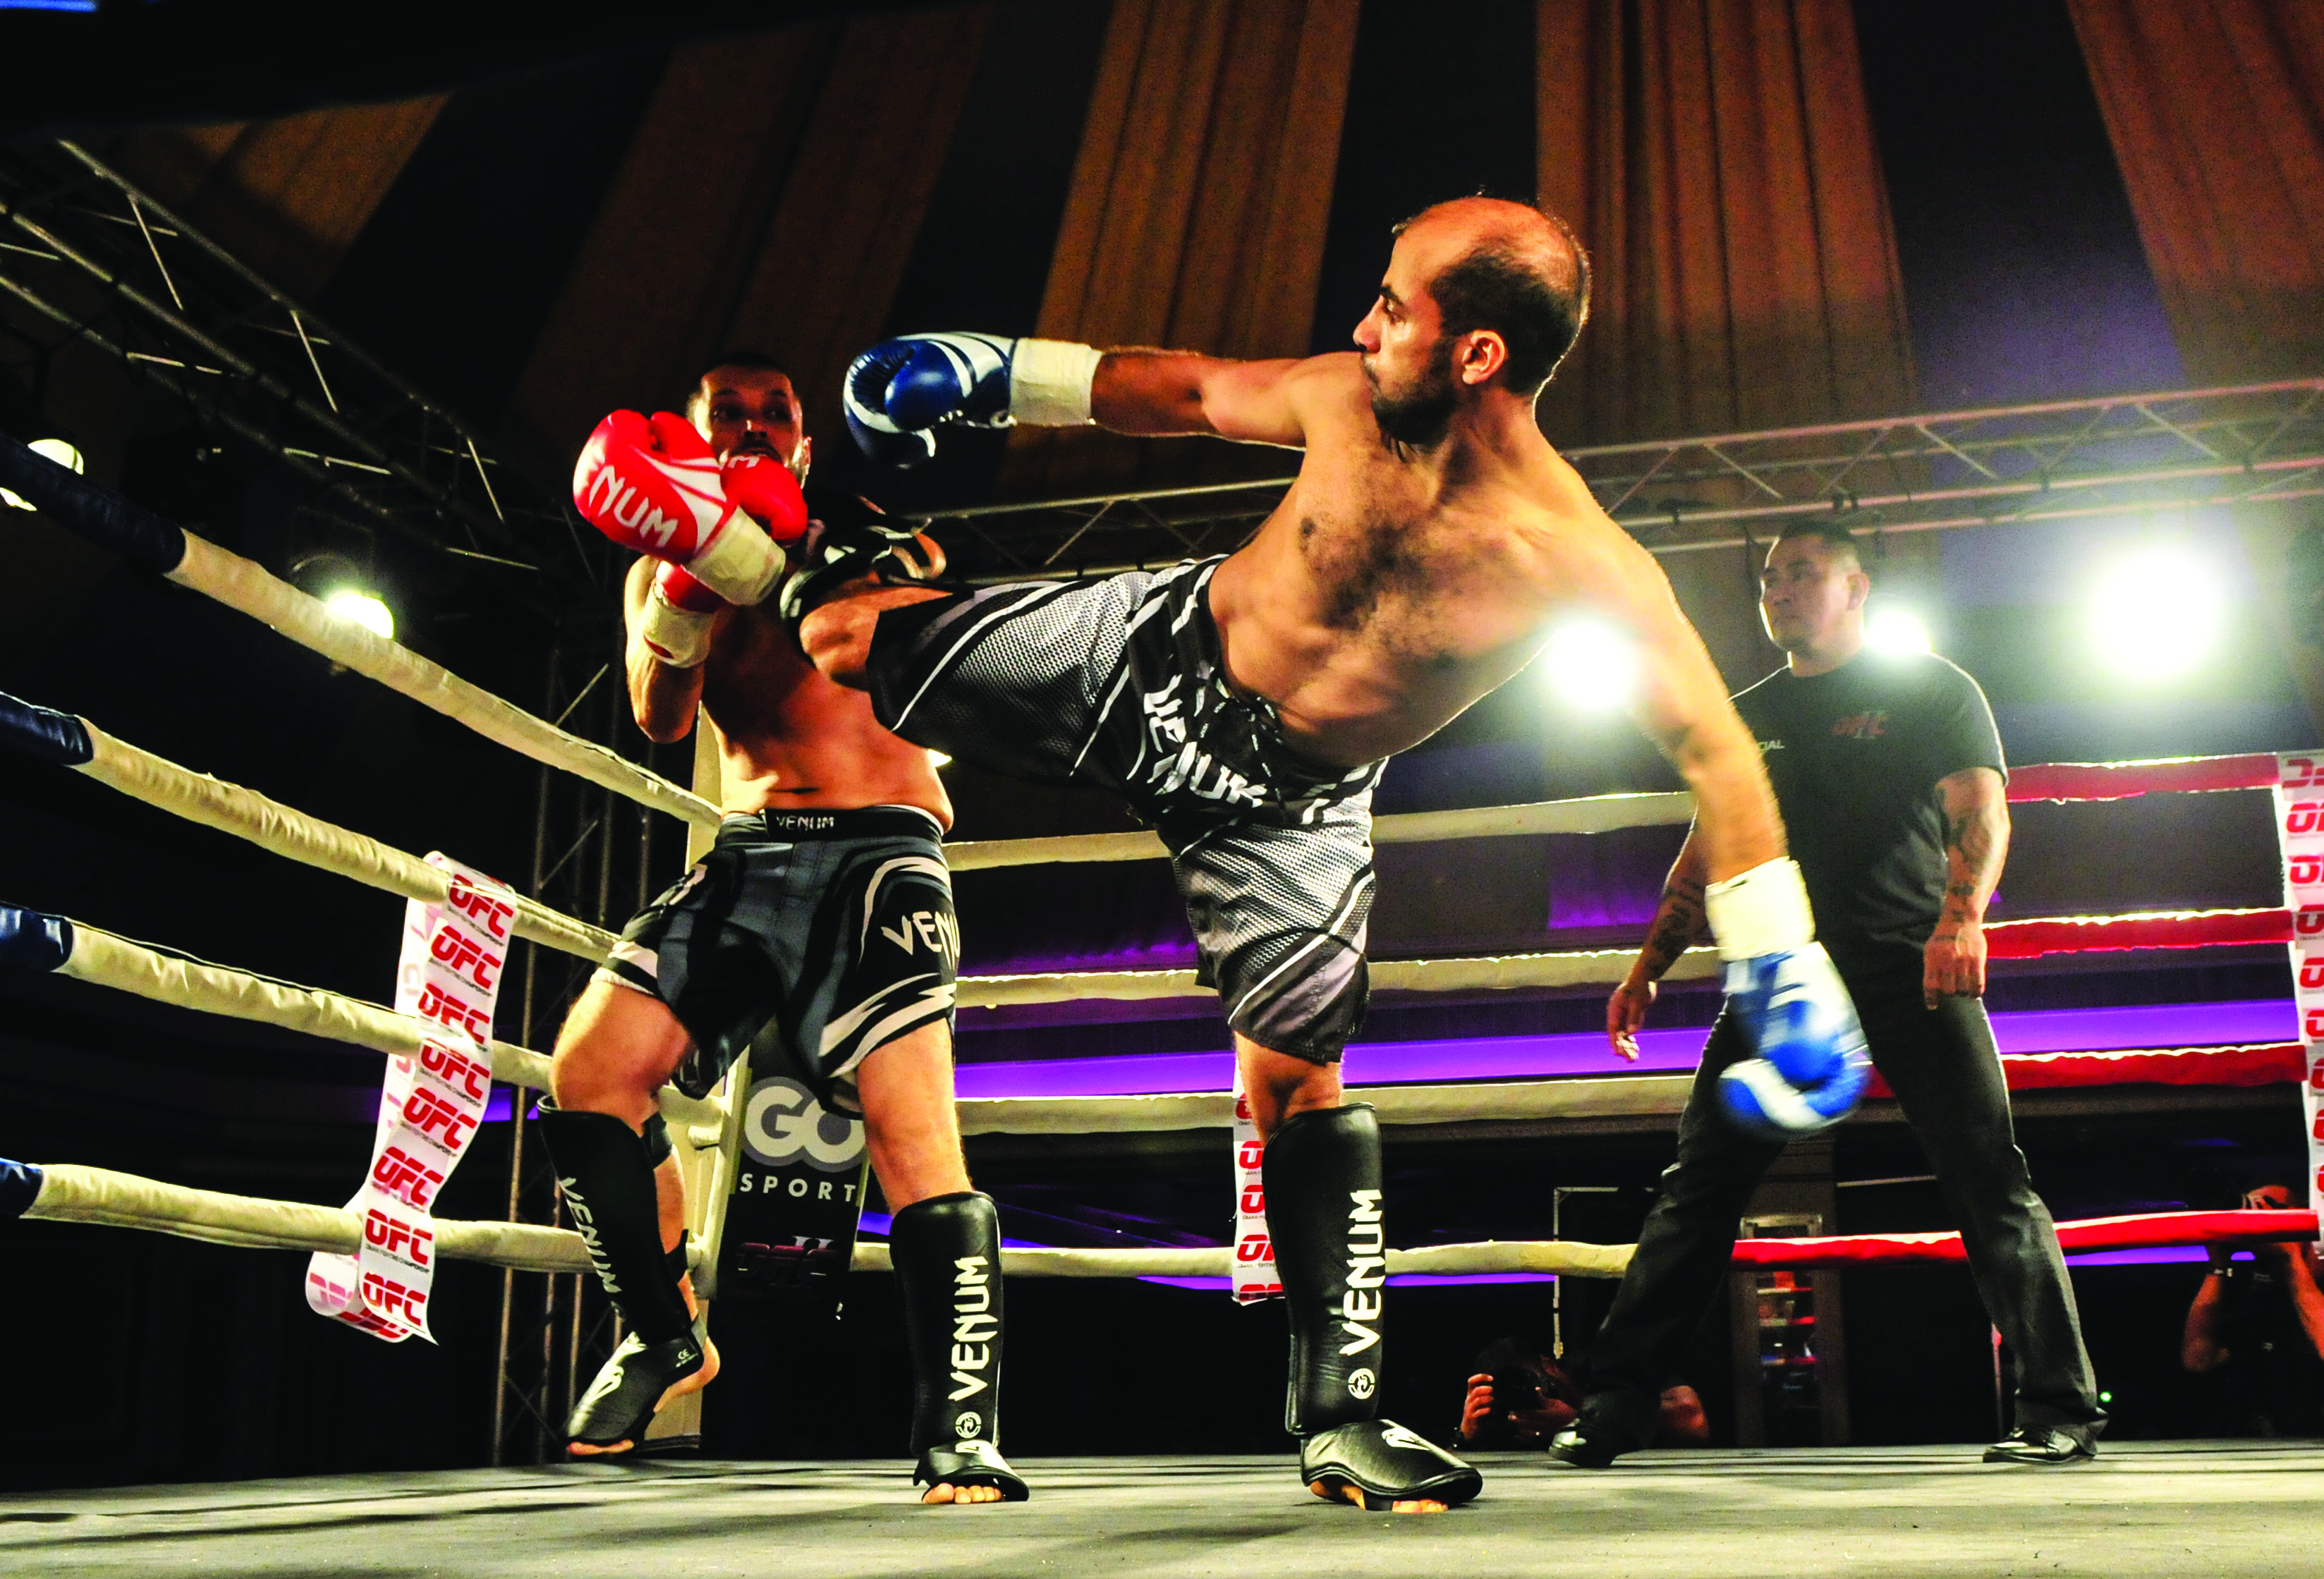 Here's when Oman's premier kickboxing tournament will take place this year